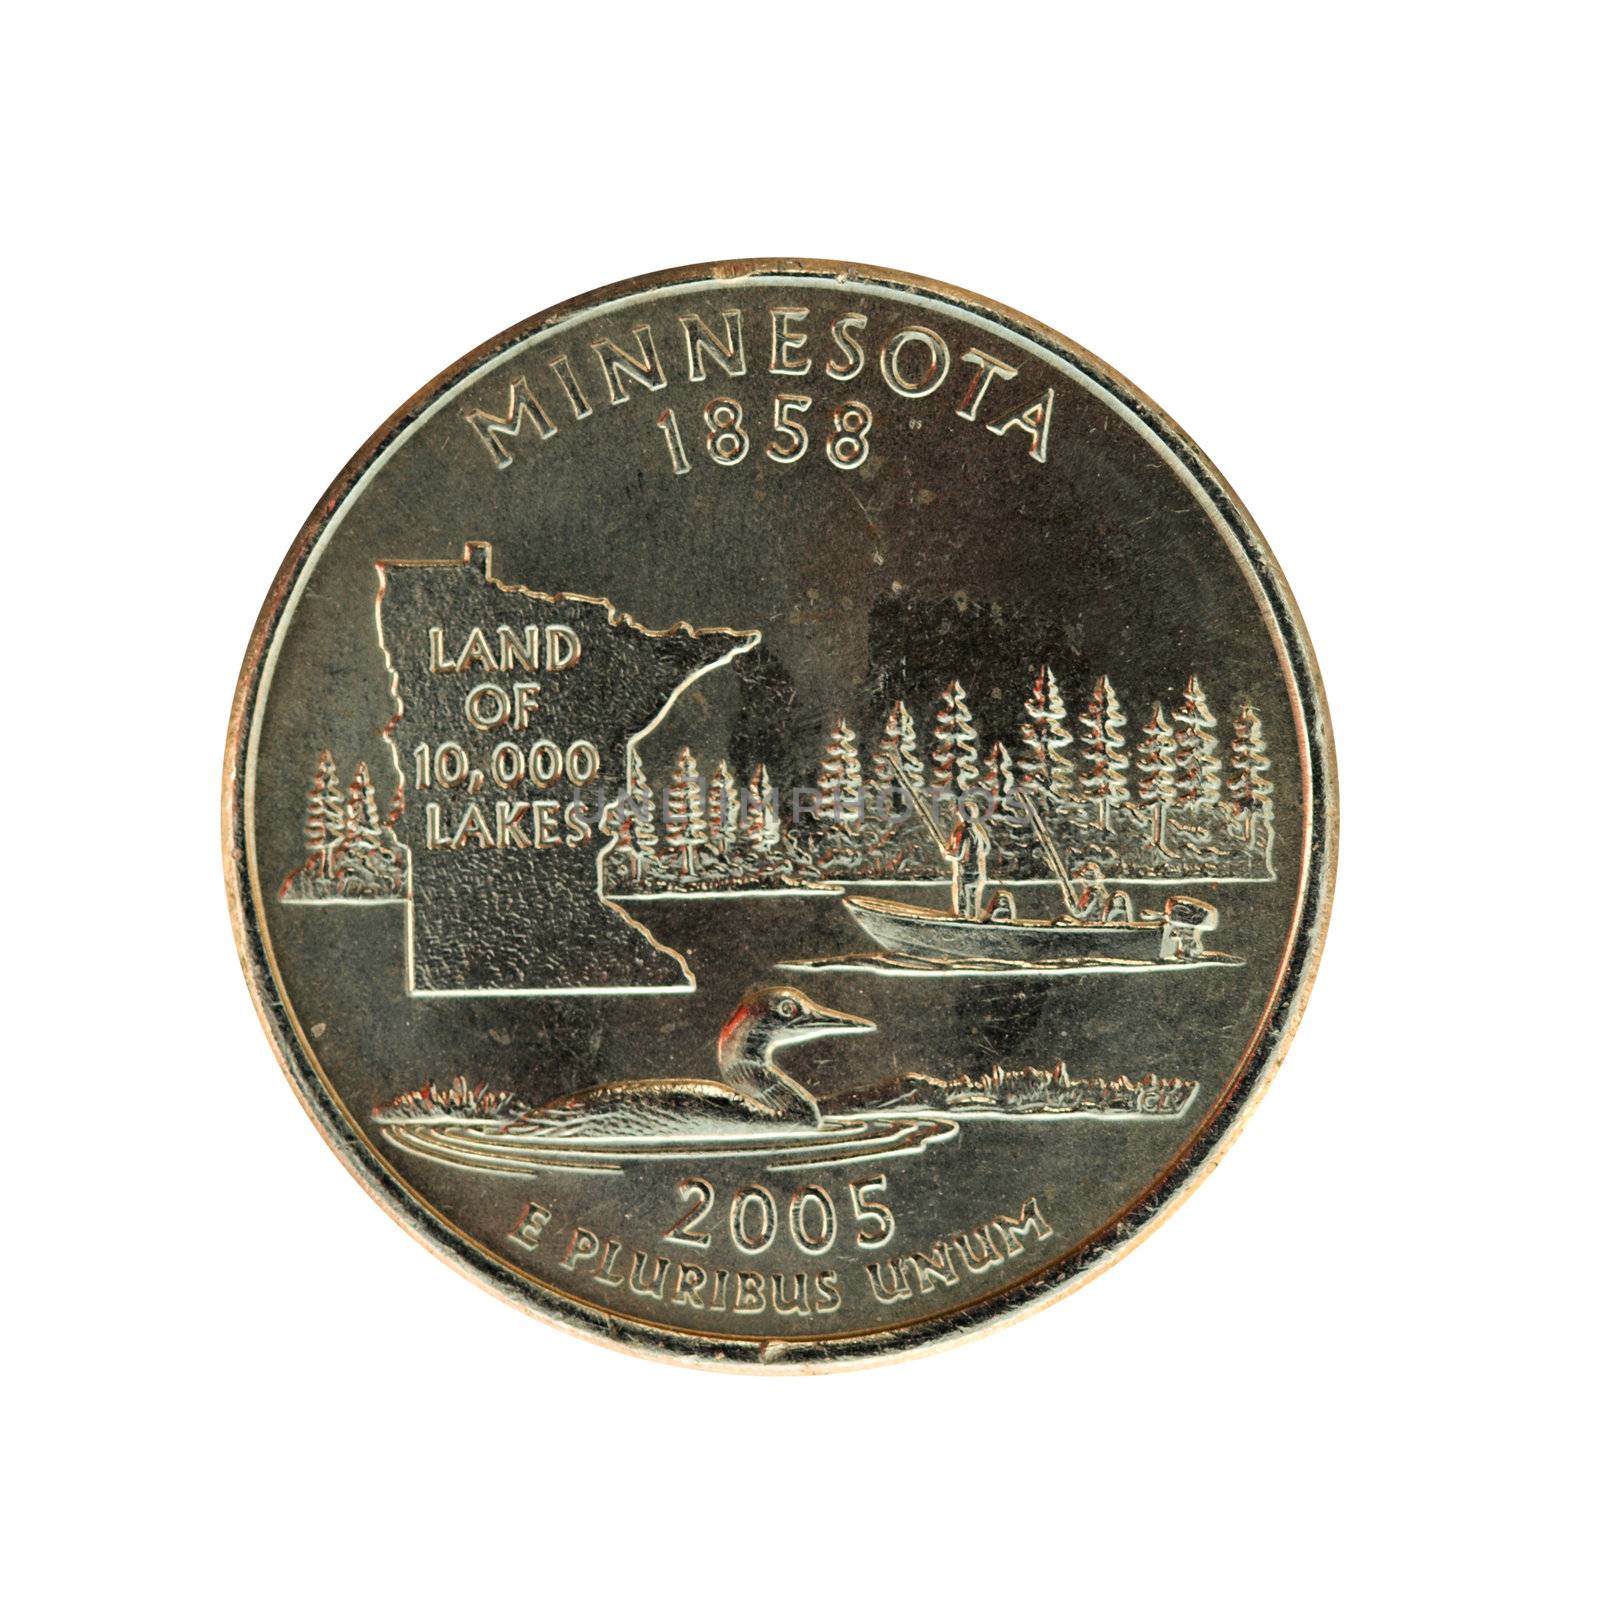 A 2005 Minnesota quarter showing the state nickname and fishing scene isolated on a white background.